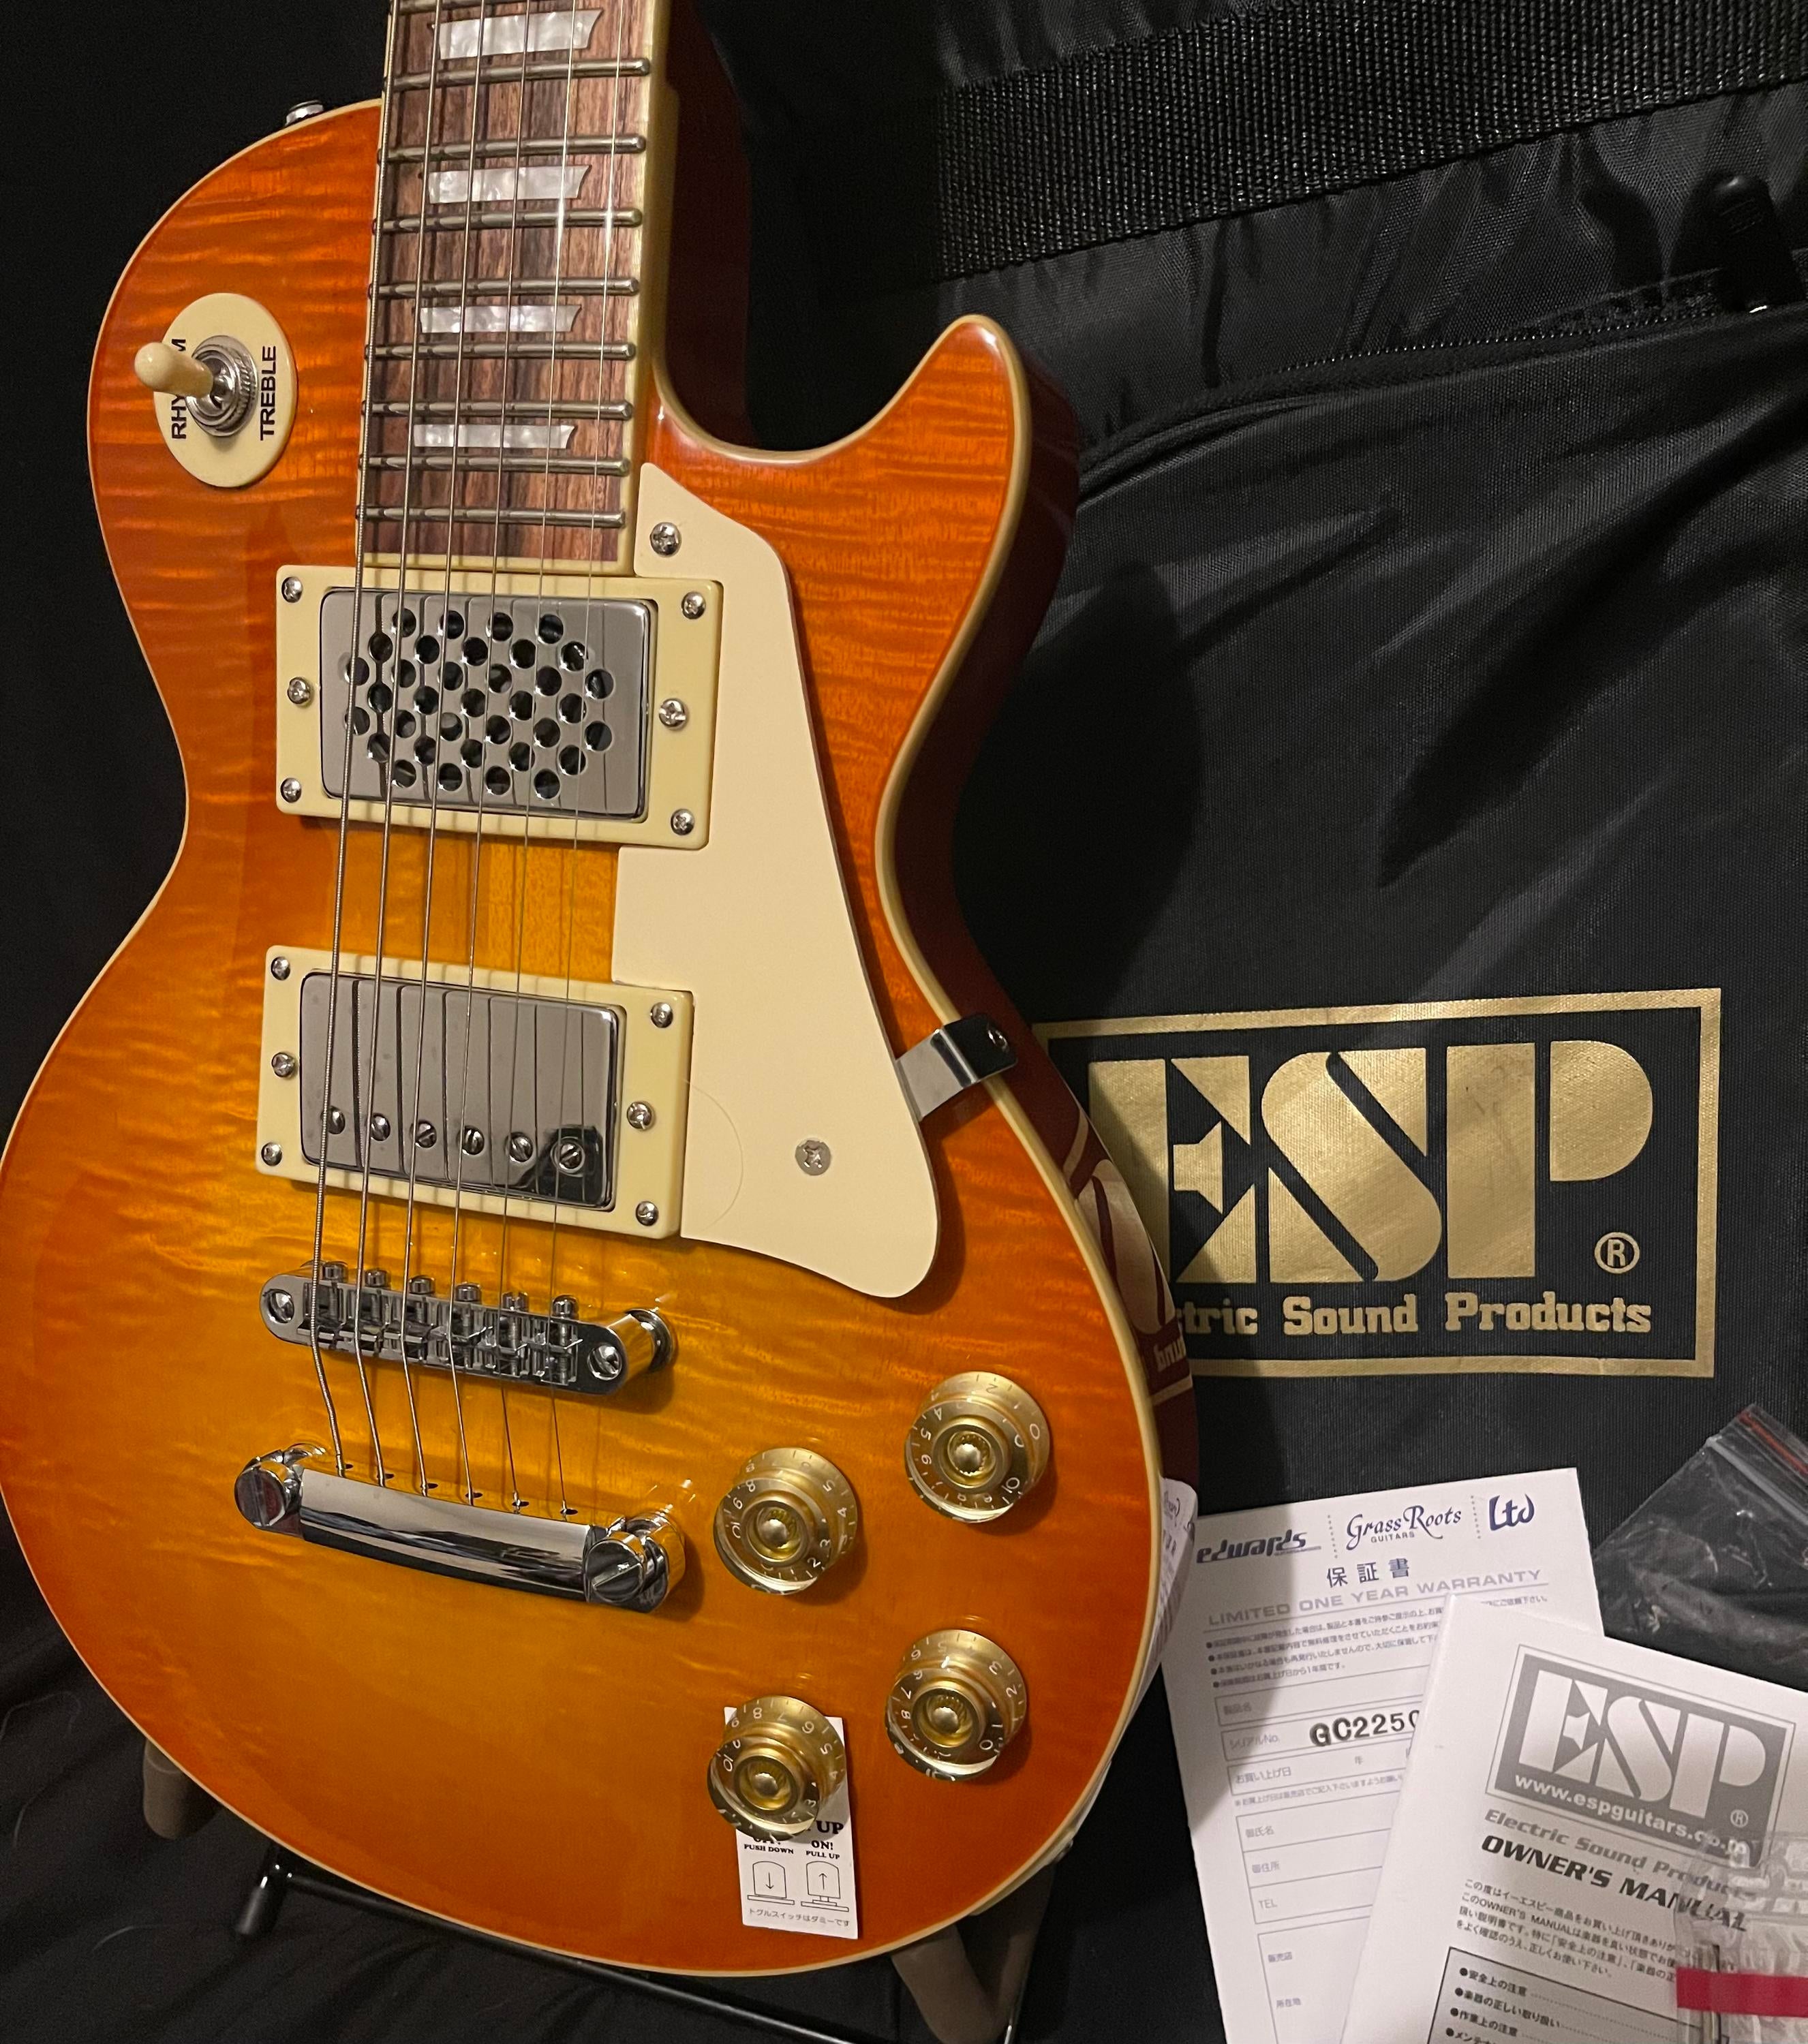 Used Grassroots High Quality  scale Les Paul travel guitar w/ built in  speaker, made by ESP/Edwards/grassroots